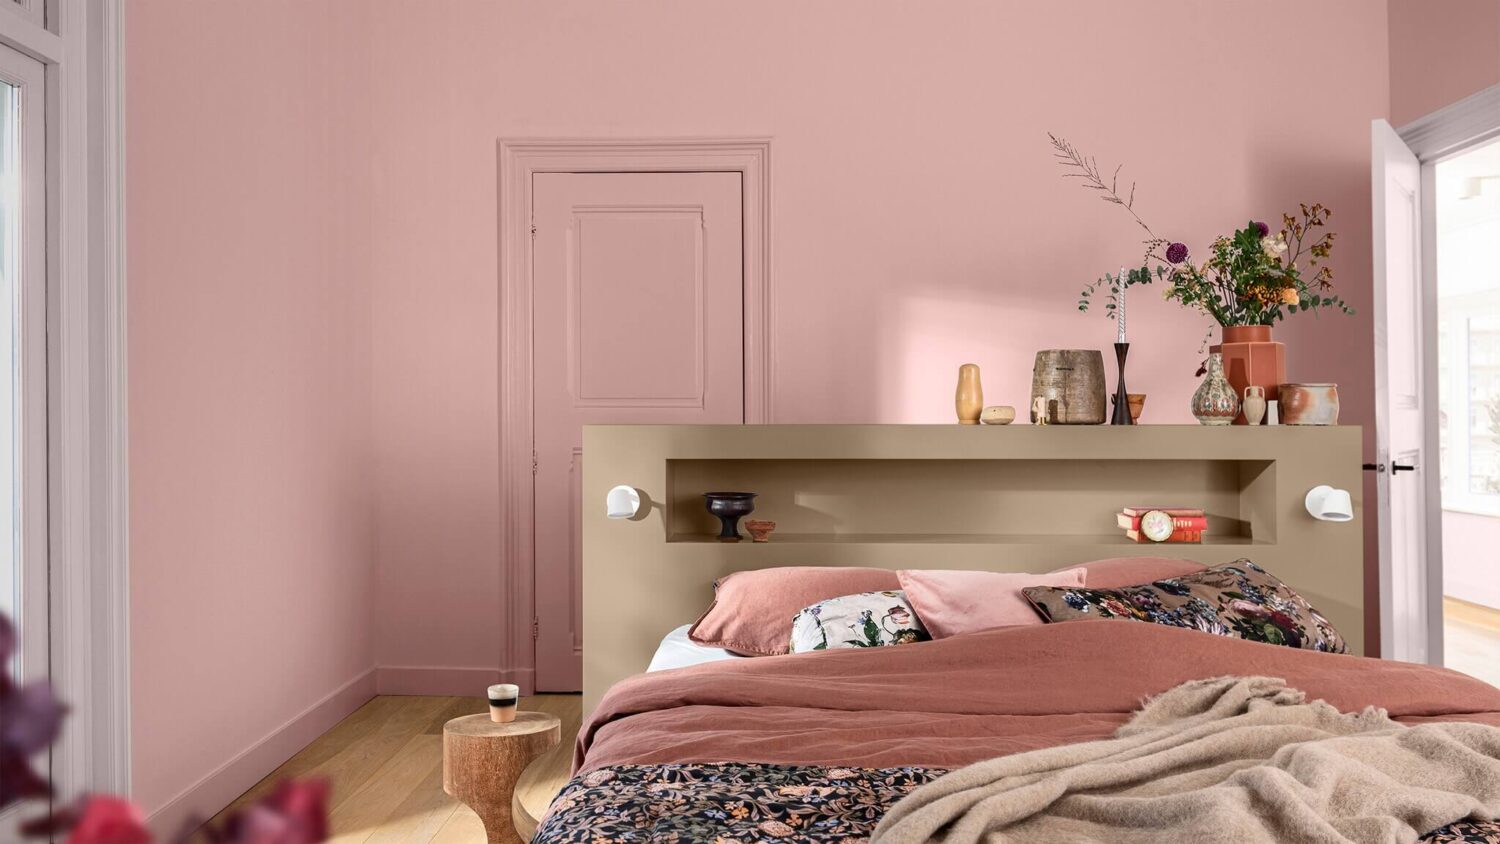 warm-colour-story-bedroom-inspiration-pink-nordroom